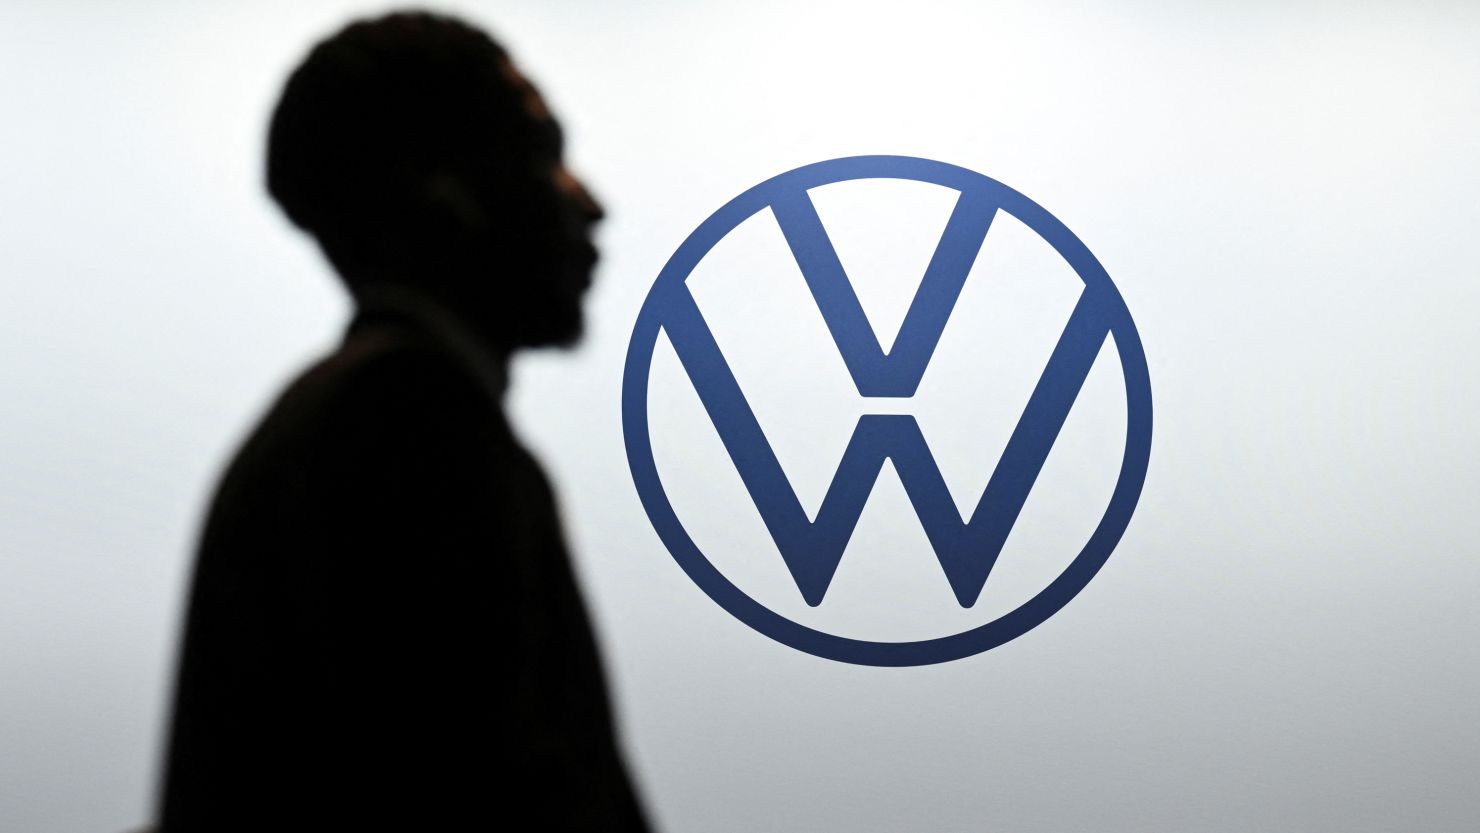 Volkswagen has been losing out to local competitors in China, its single biggest market.